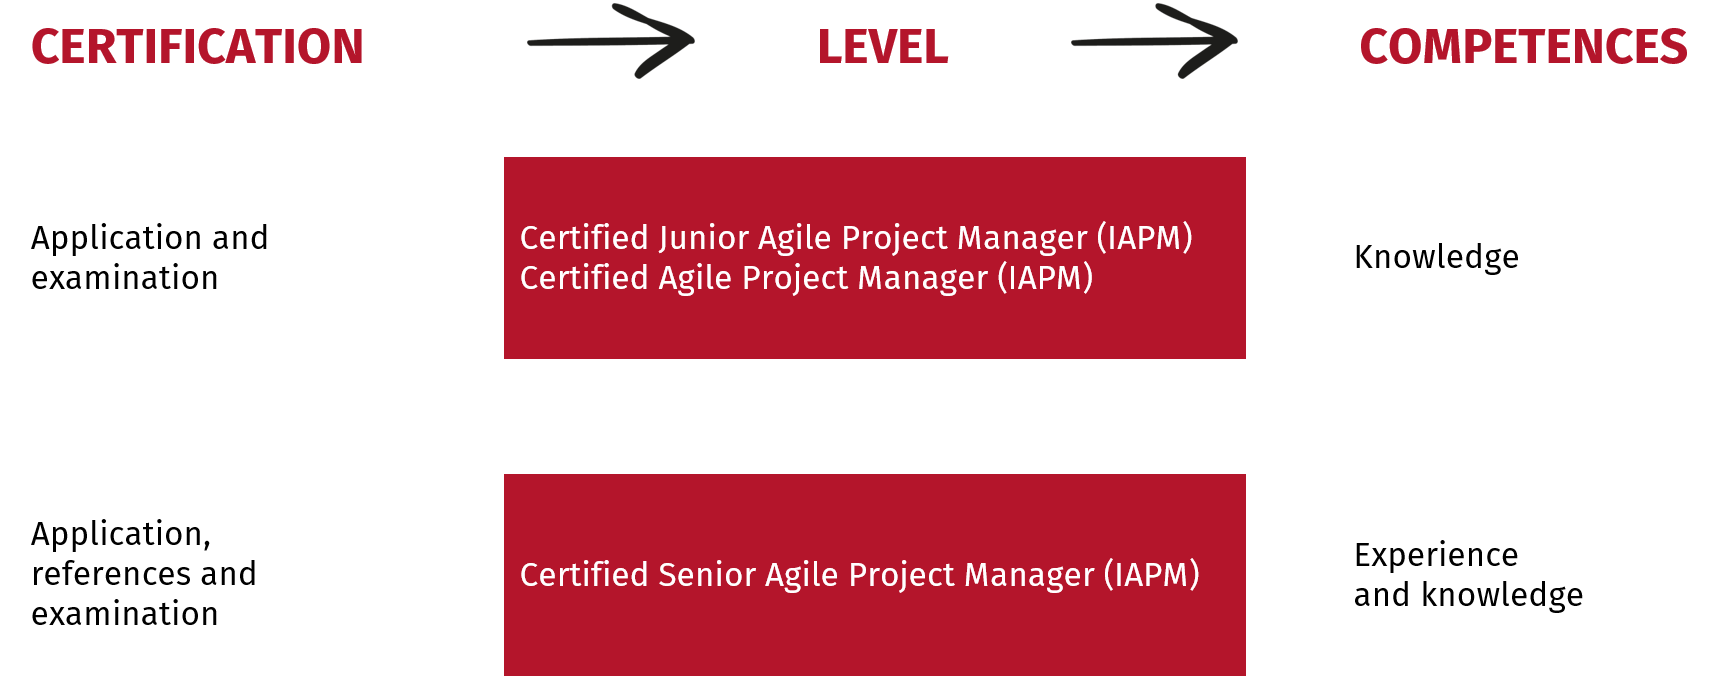 Overview - IAPM certifications in the field of agile project management